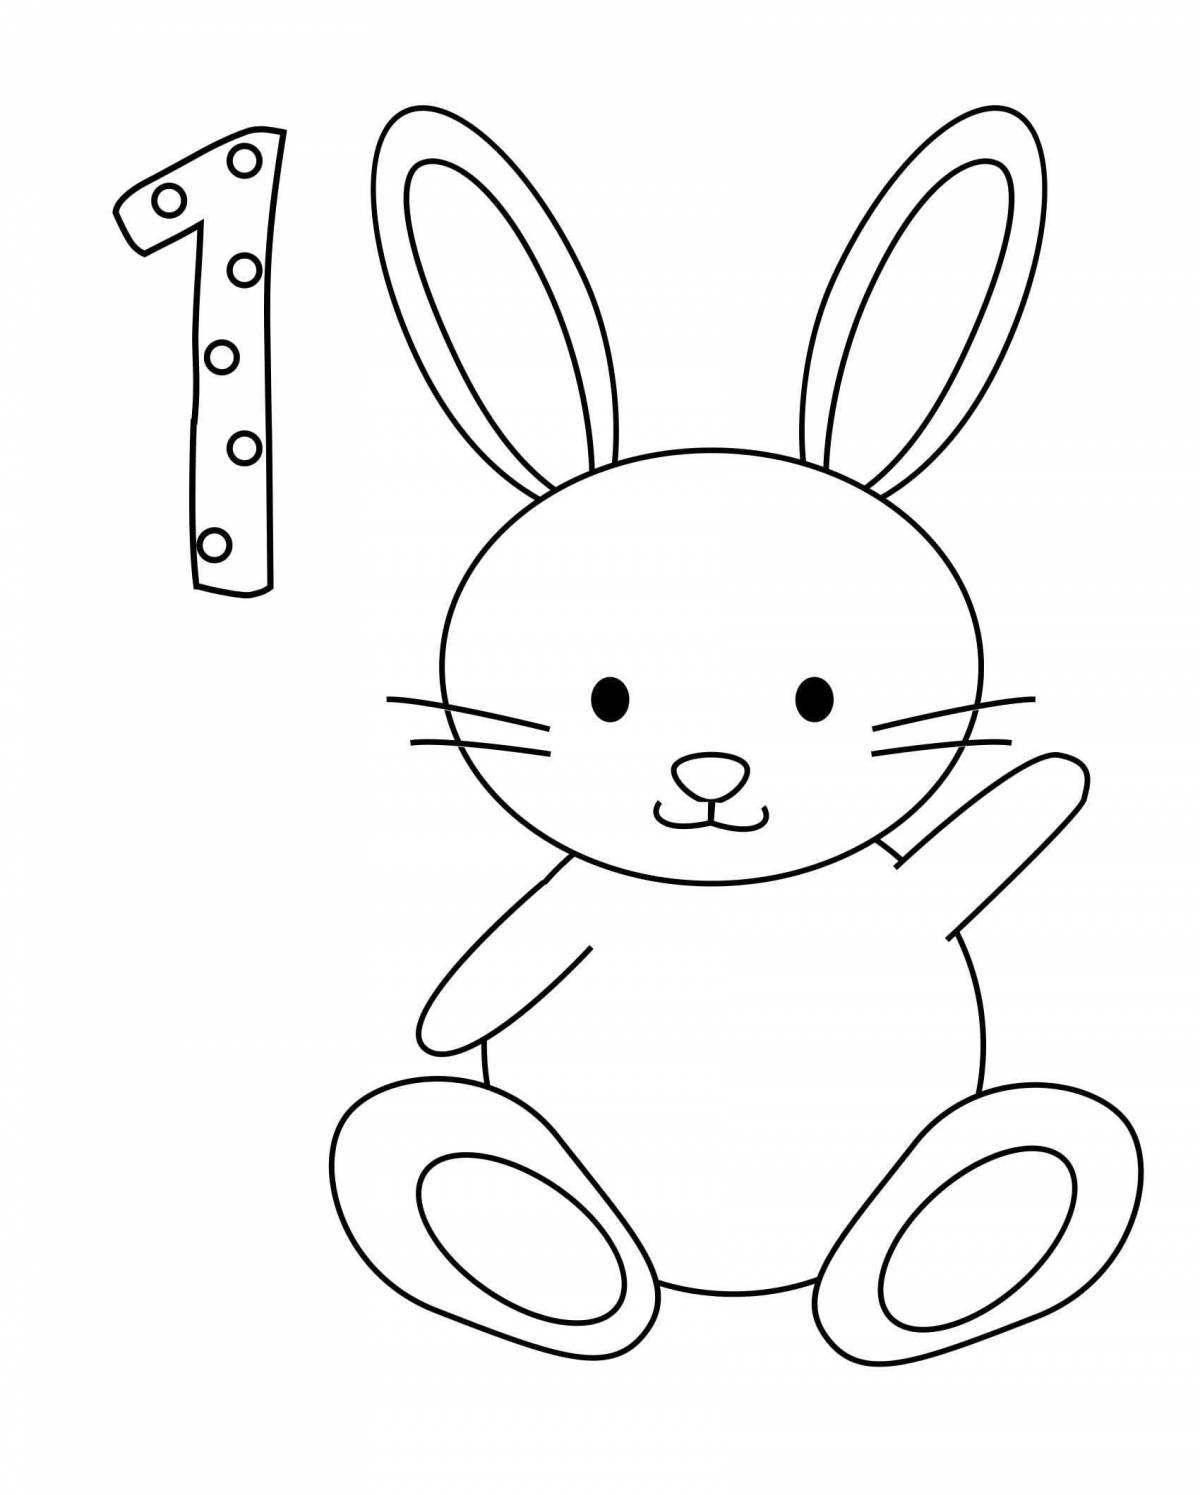 Glorious rabbit coloring book for children 3-4 years old